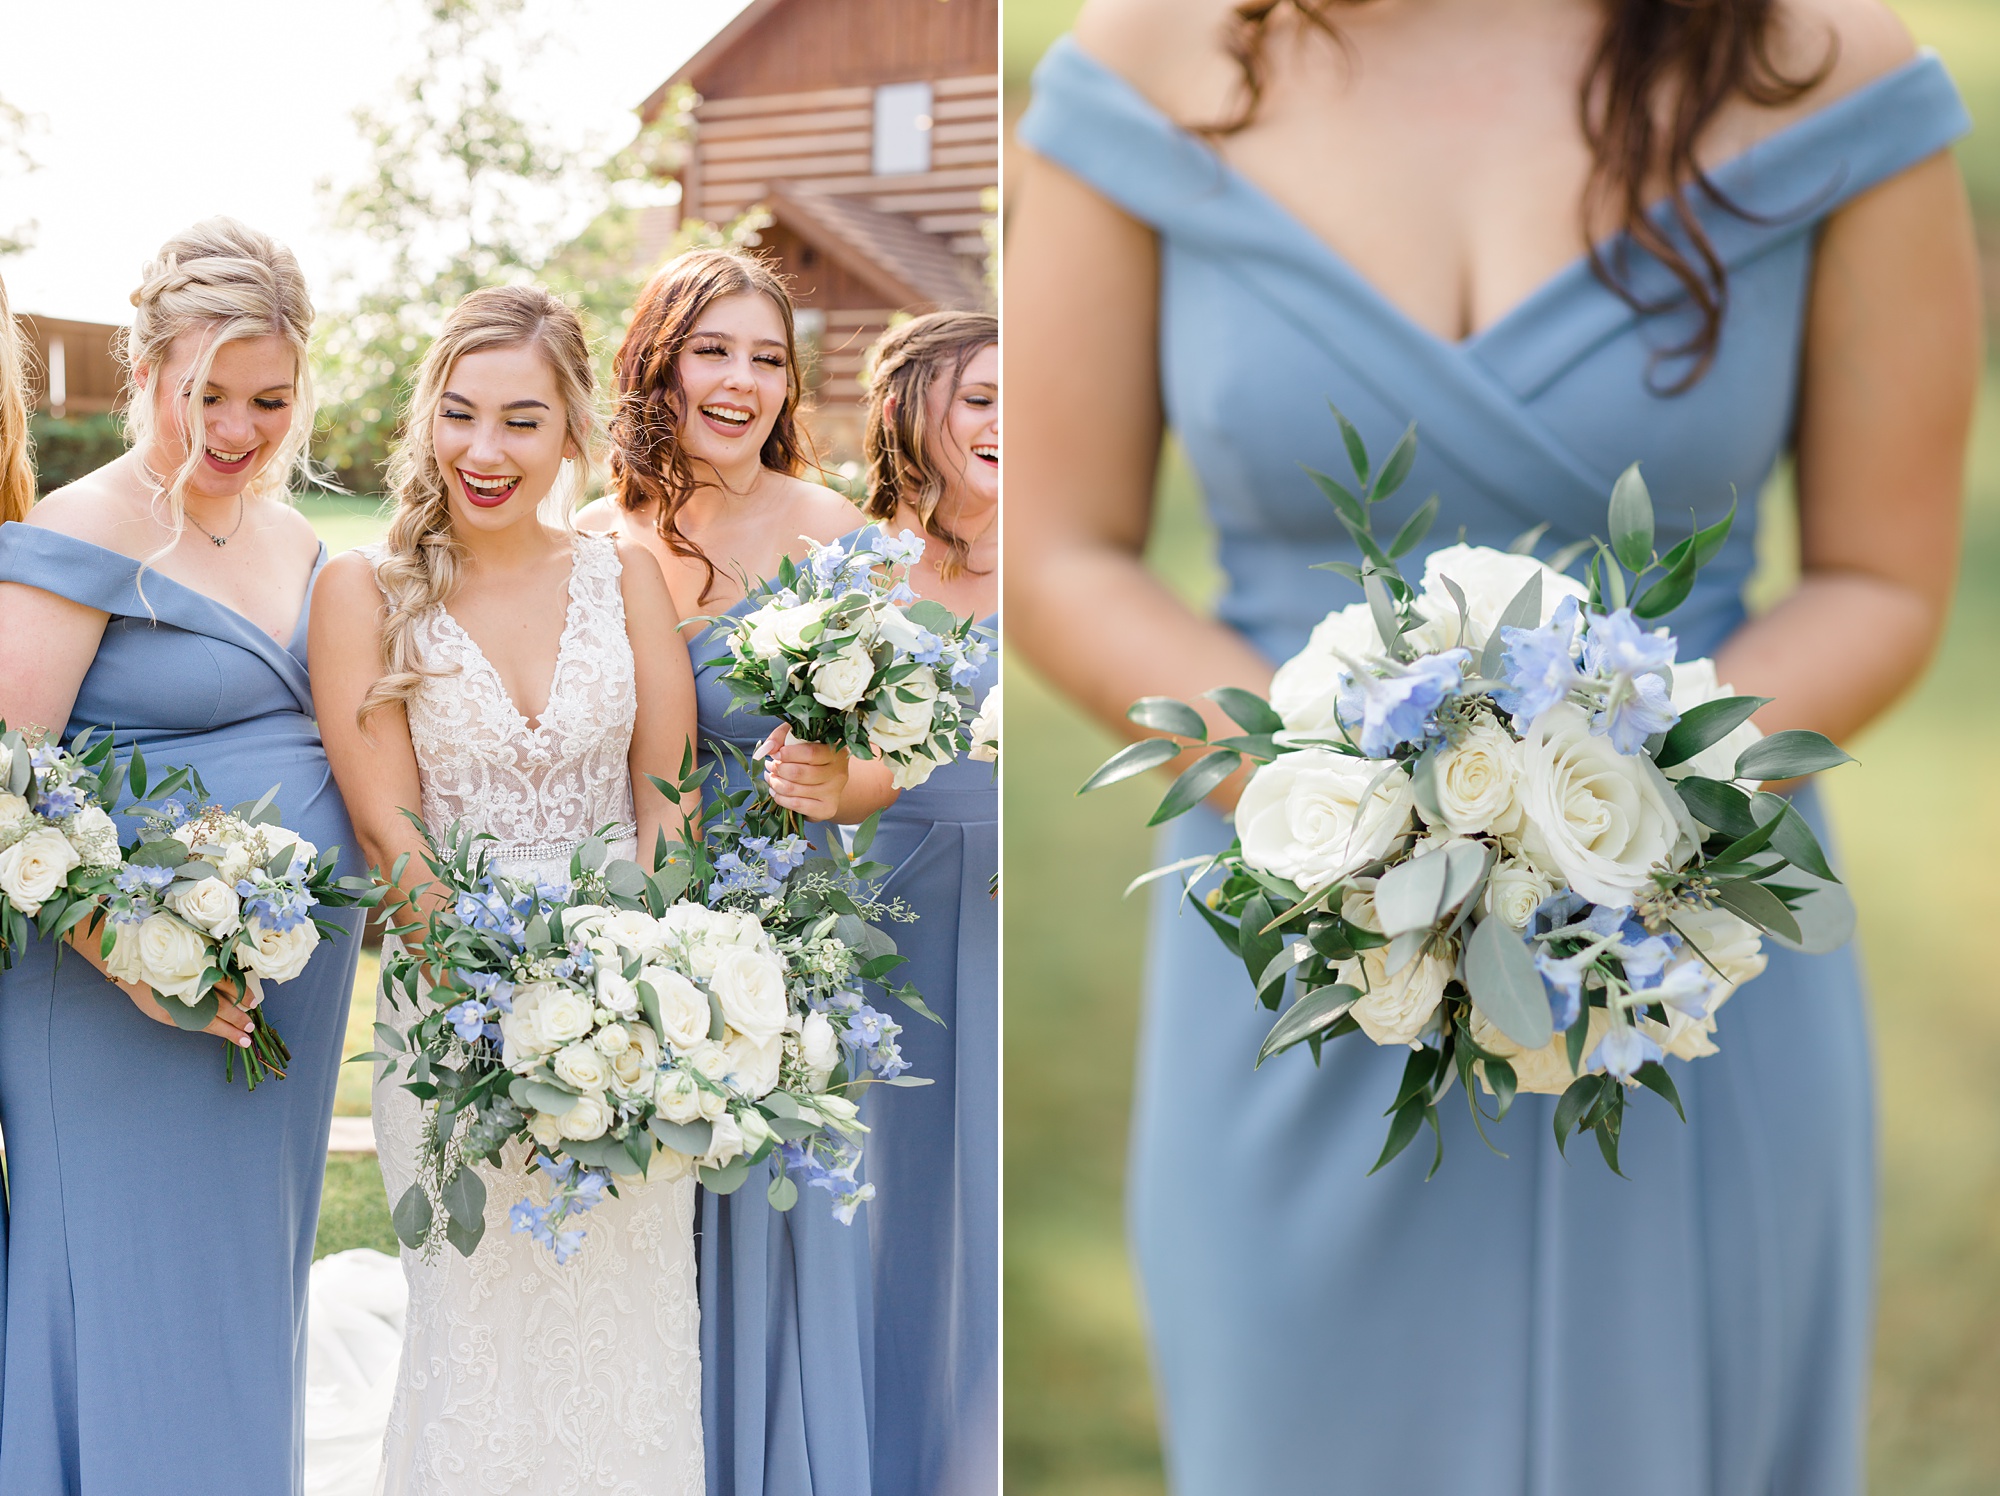 Texas bridesmaids holds bouquet of white and blue flowers